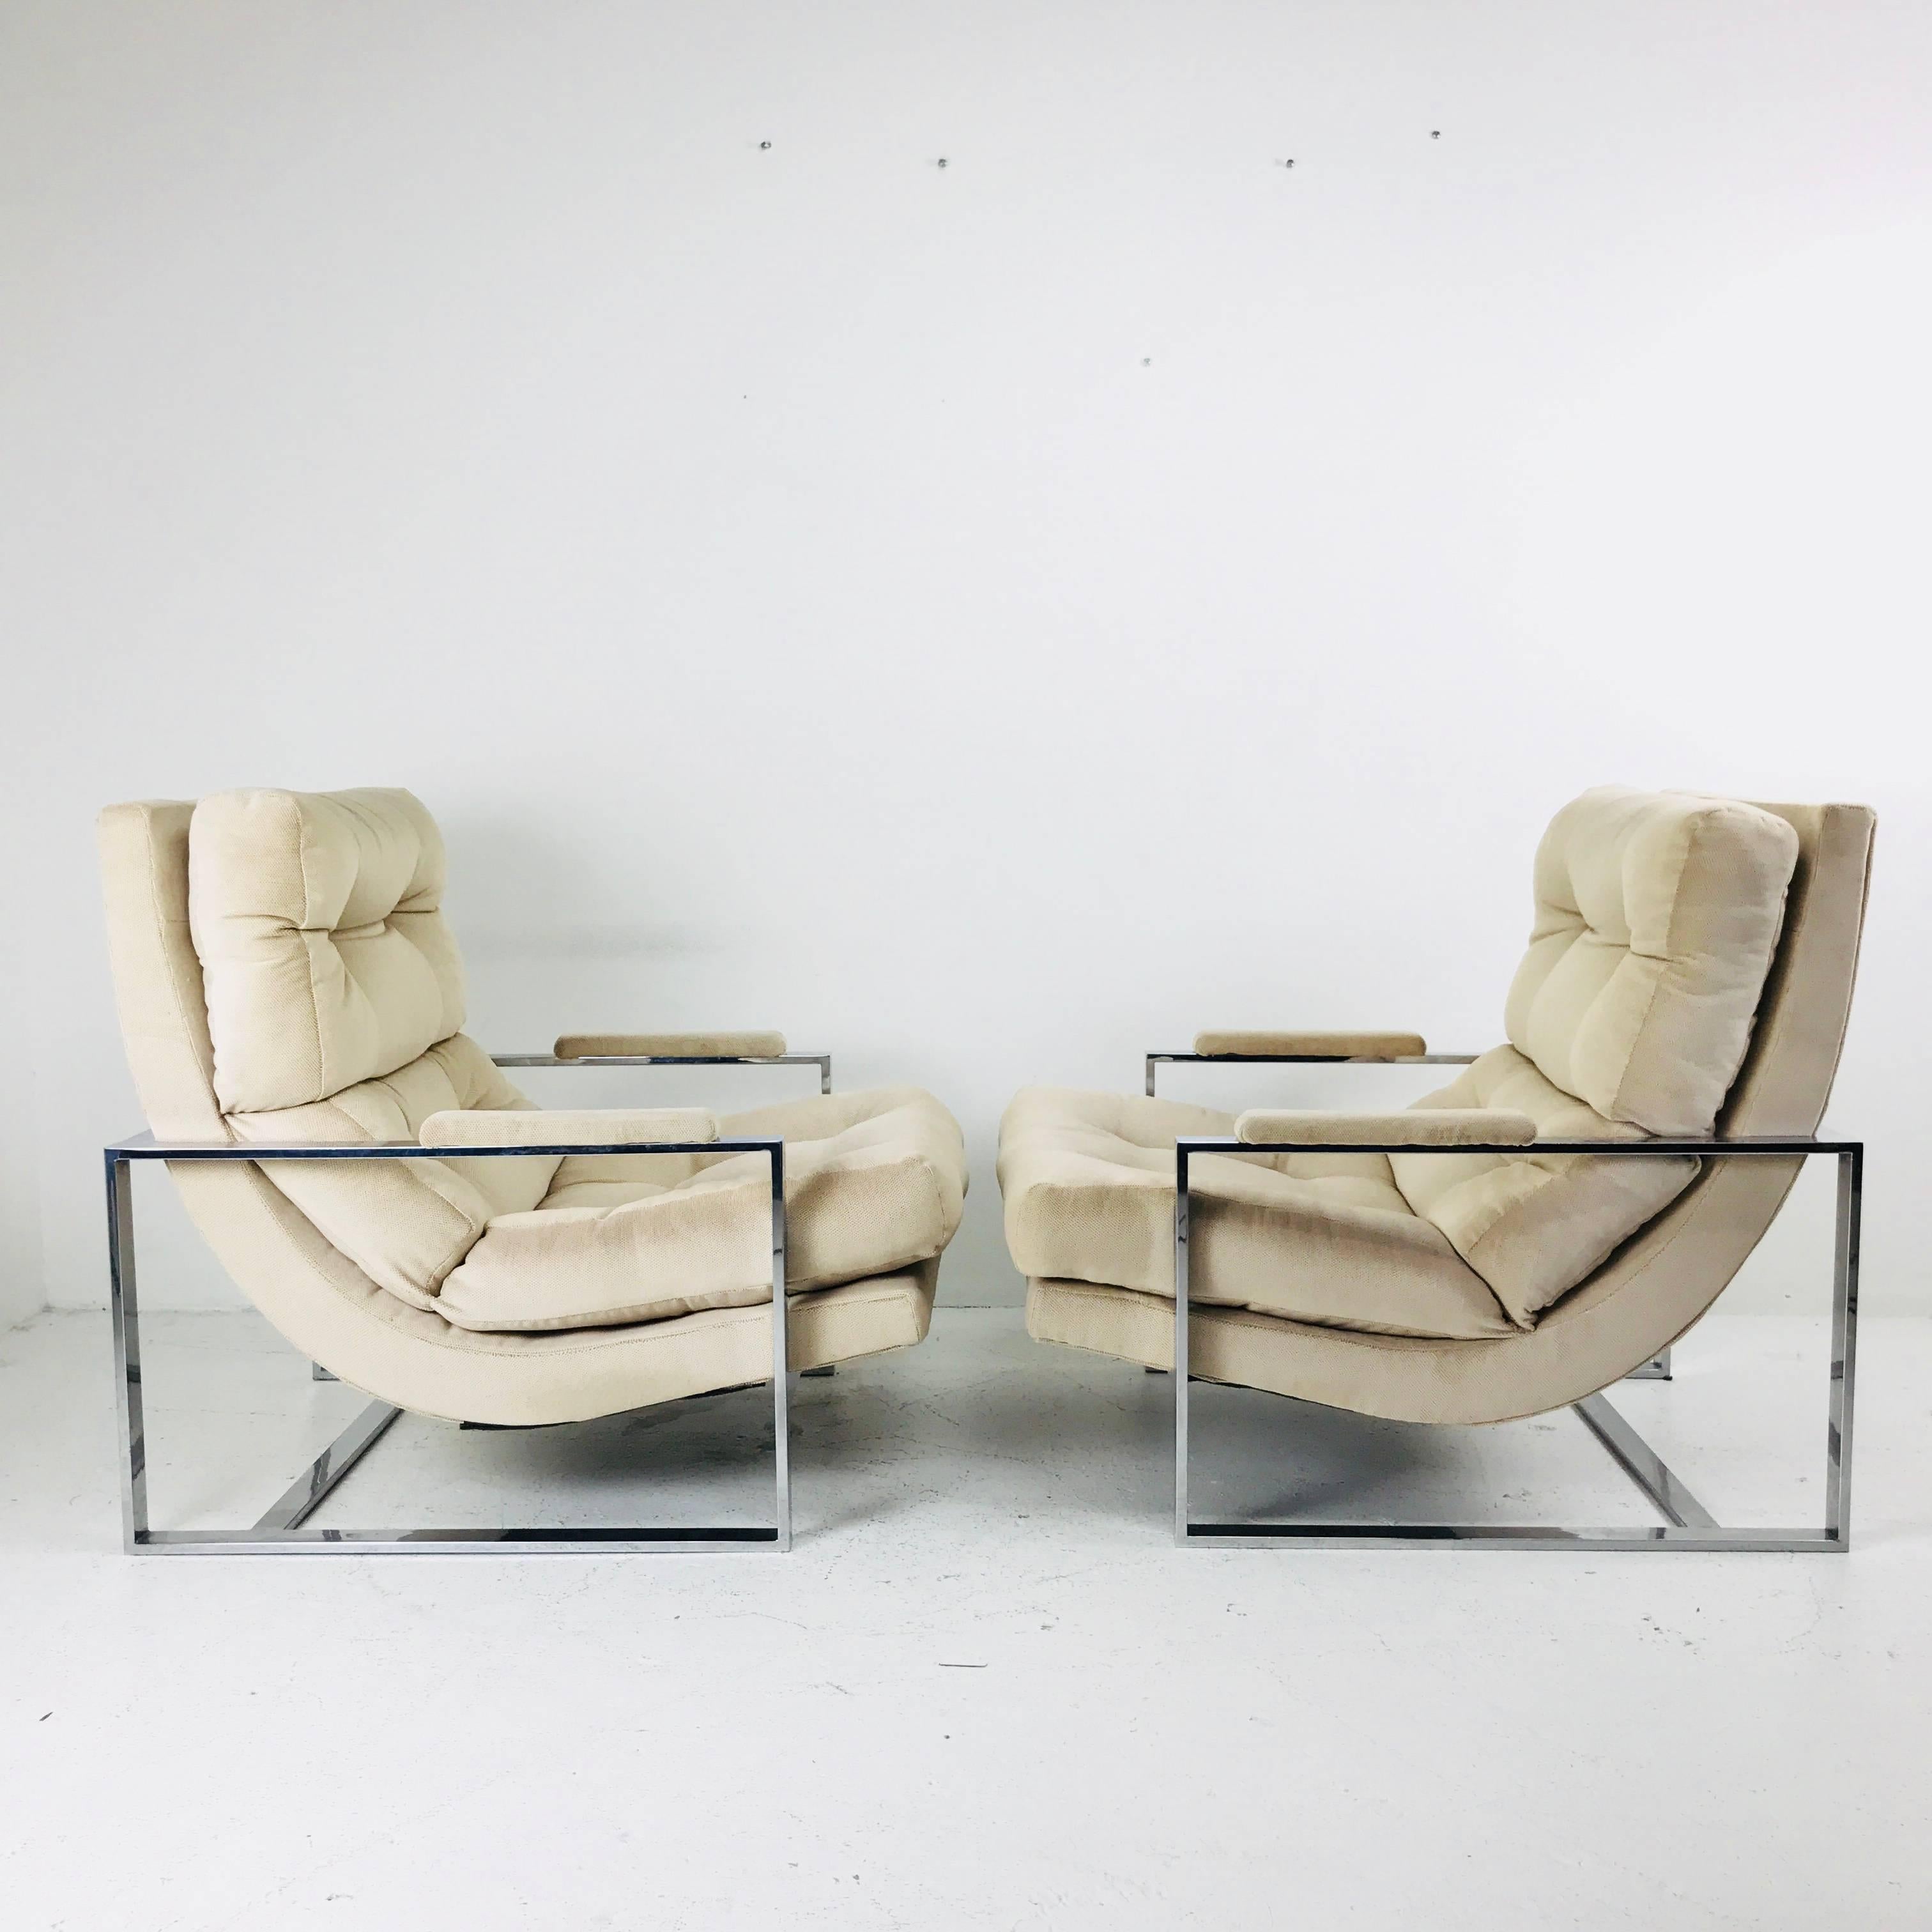 Pair of chrome lounge chairs in the style of Milo Baughman. Chairs are in good found condition with wear due to age and use.

Dimensions: 28